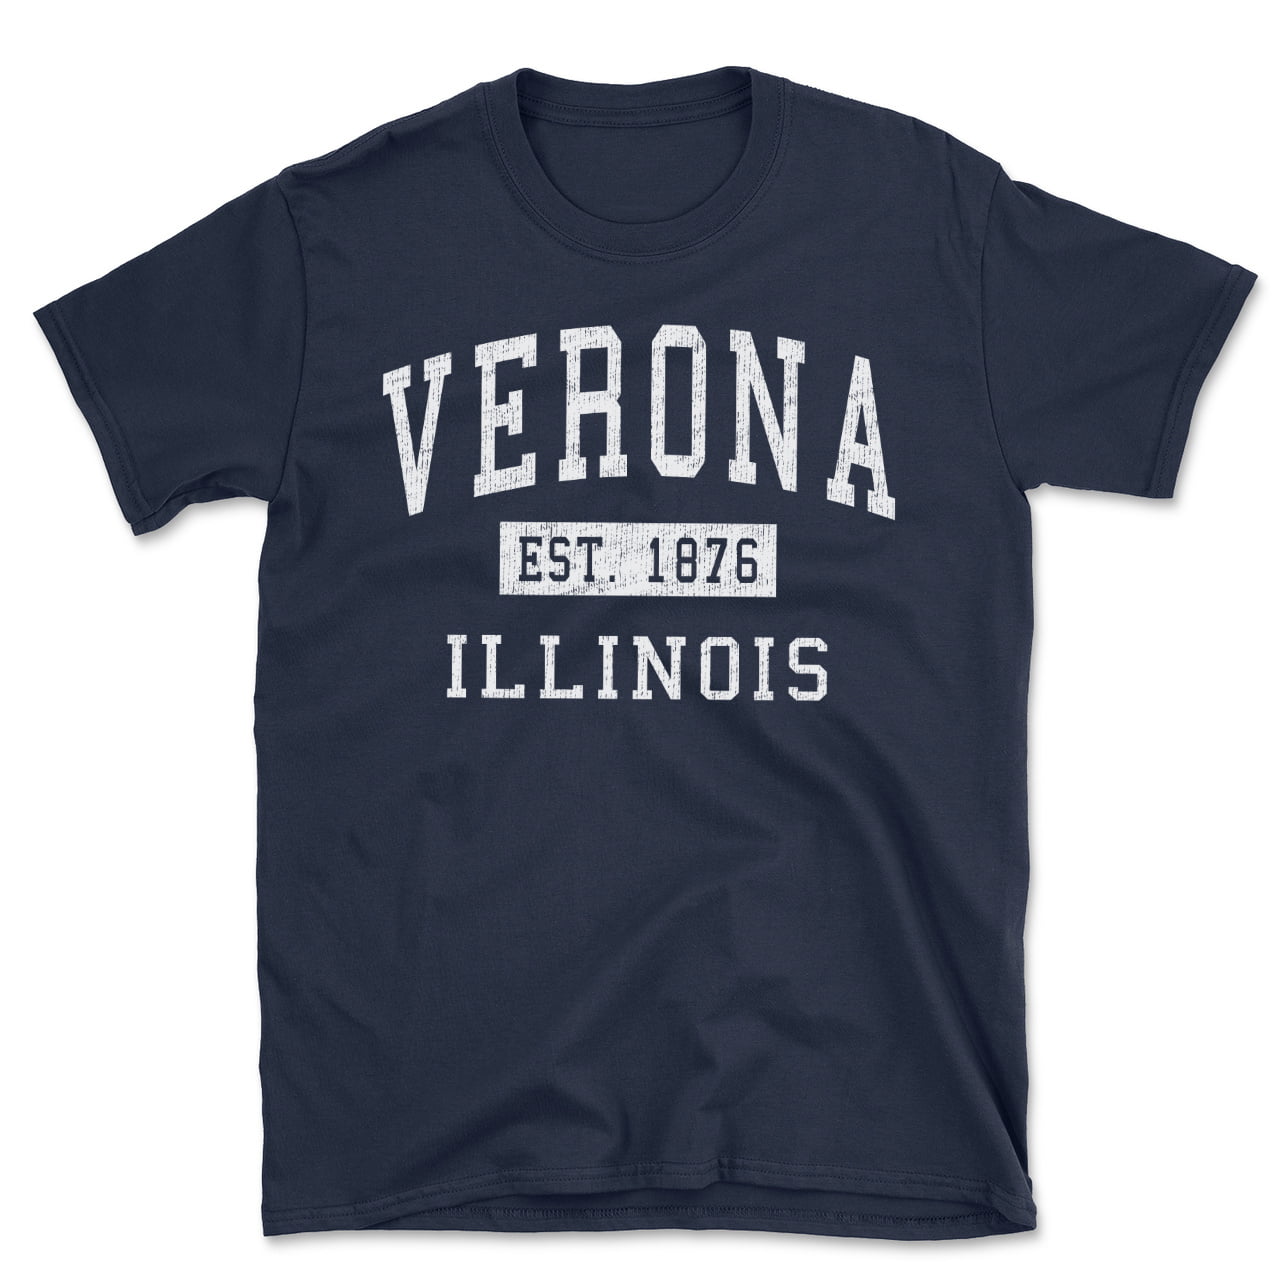 The Great. The Verona Top - White